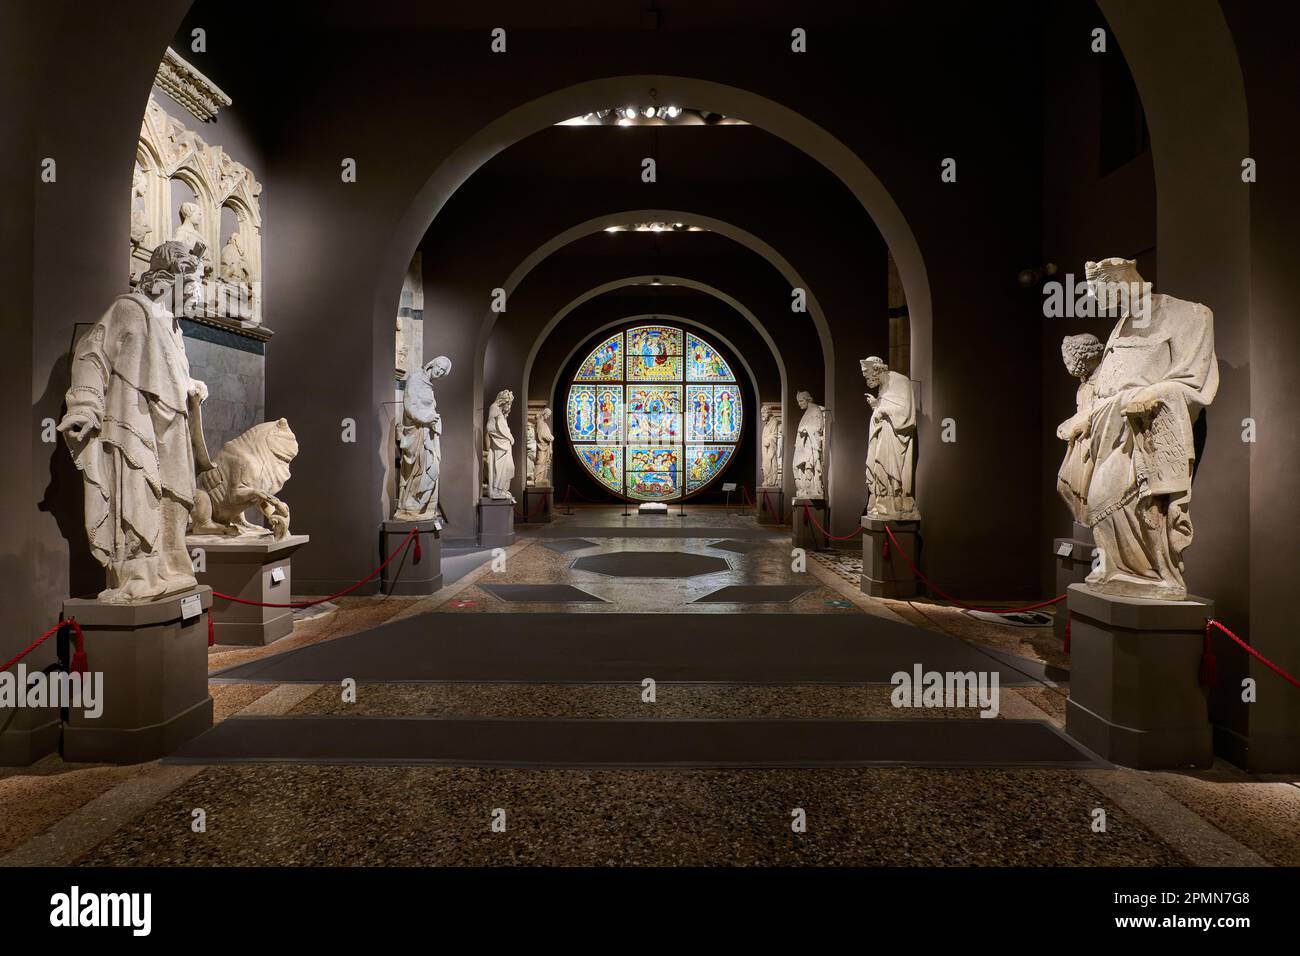 Museo dell'Opera Metropolitana del Duomo, Cathedral Museum with marble statues, altarpieces and restored medieval stained glass windows, Siena Stock Photo